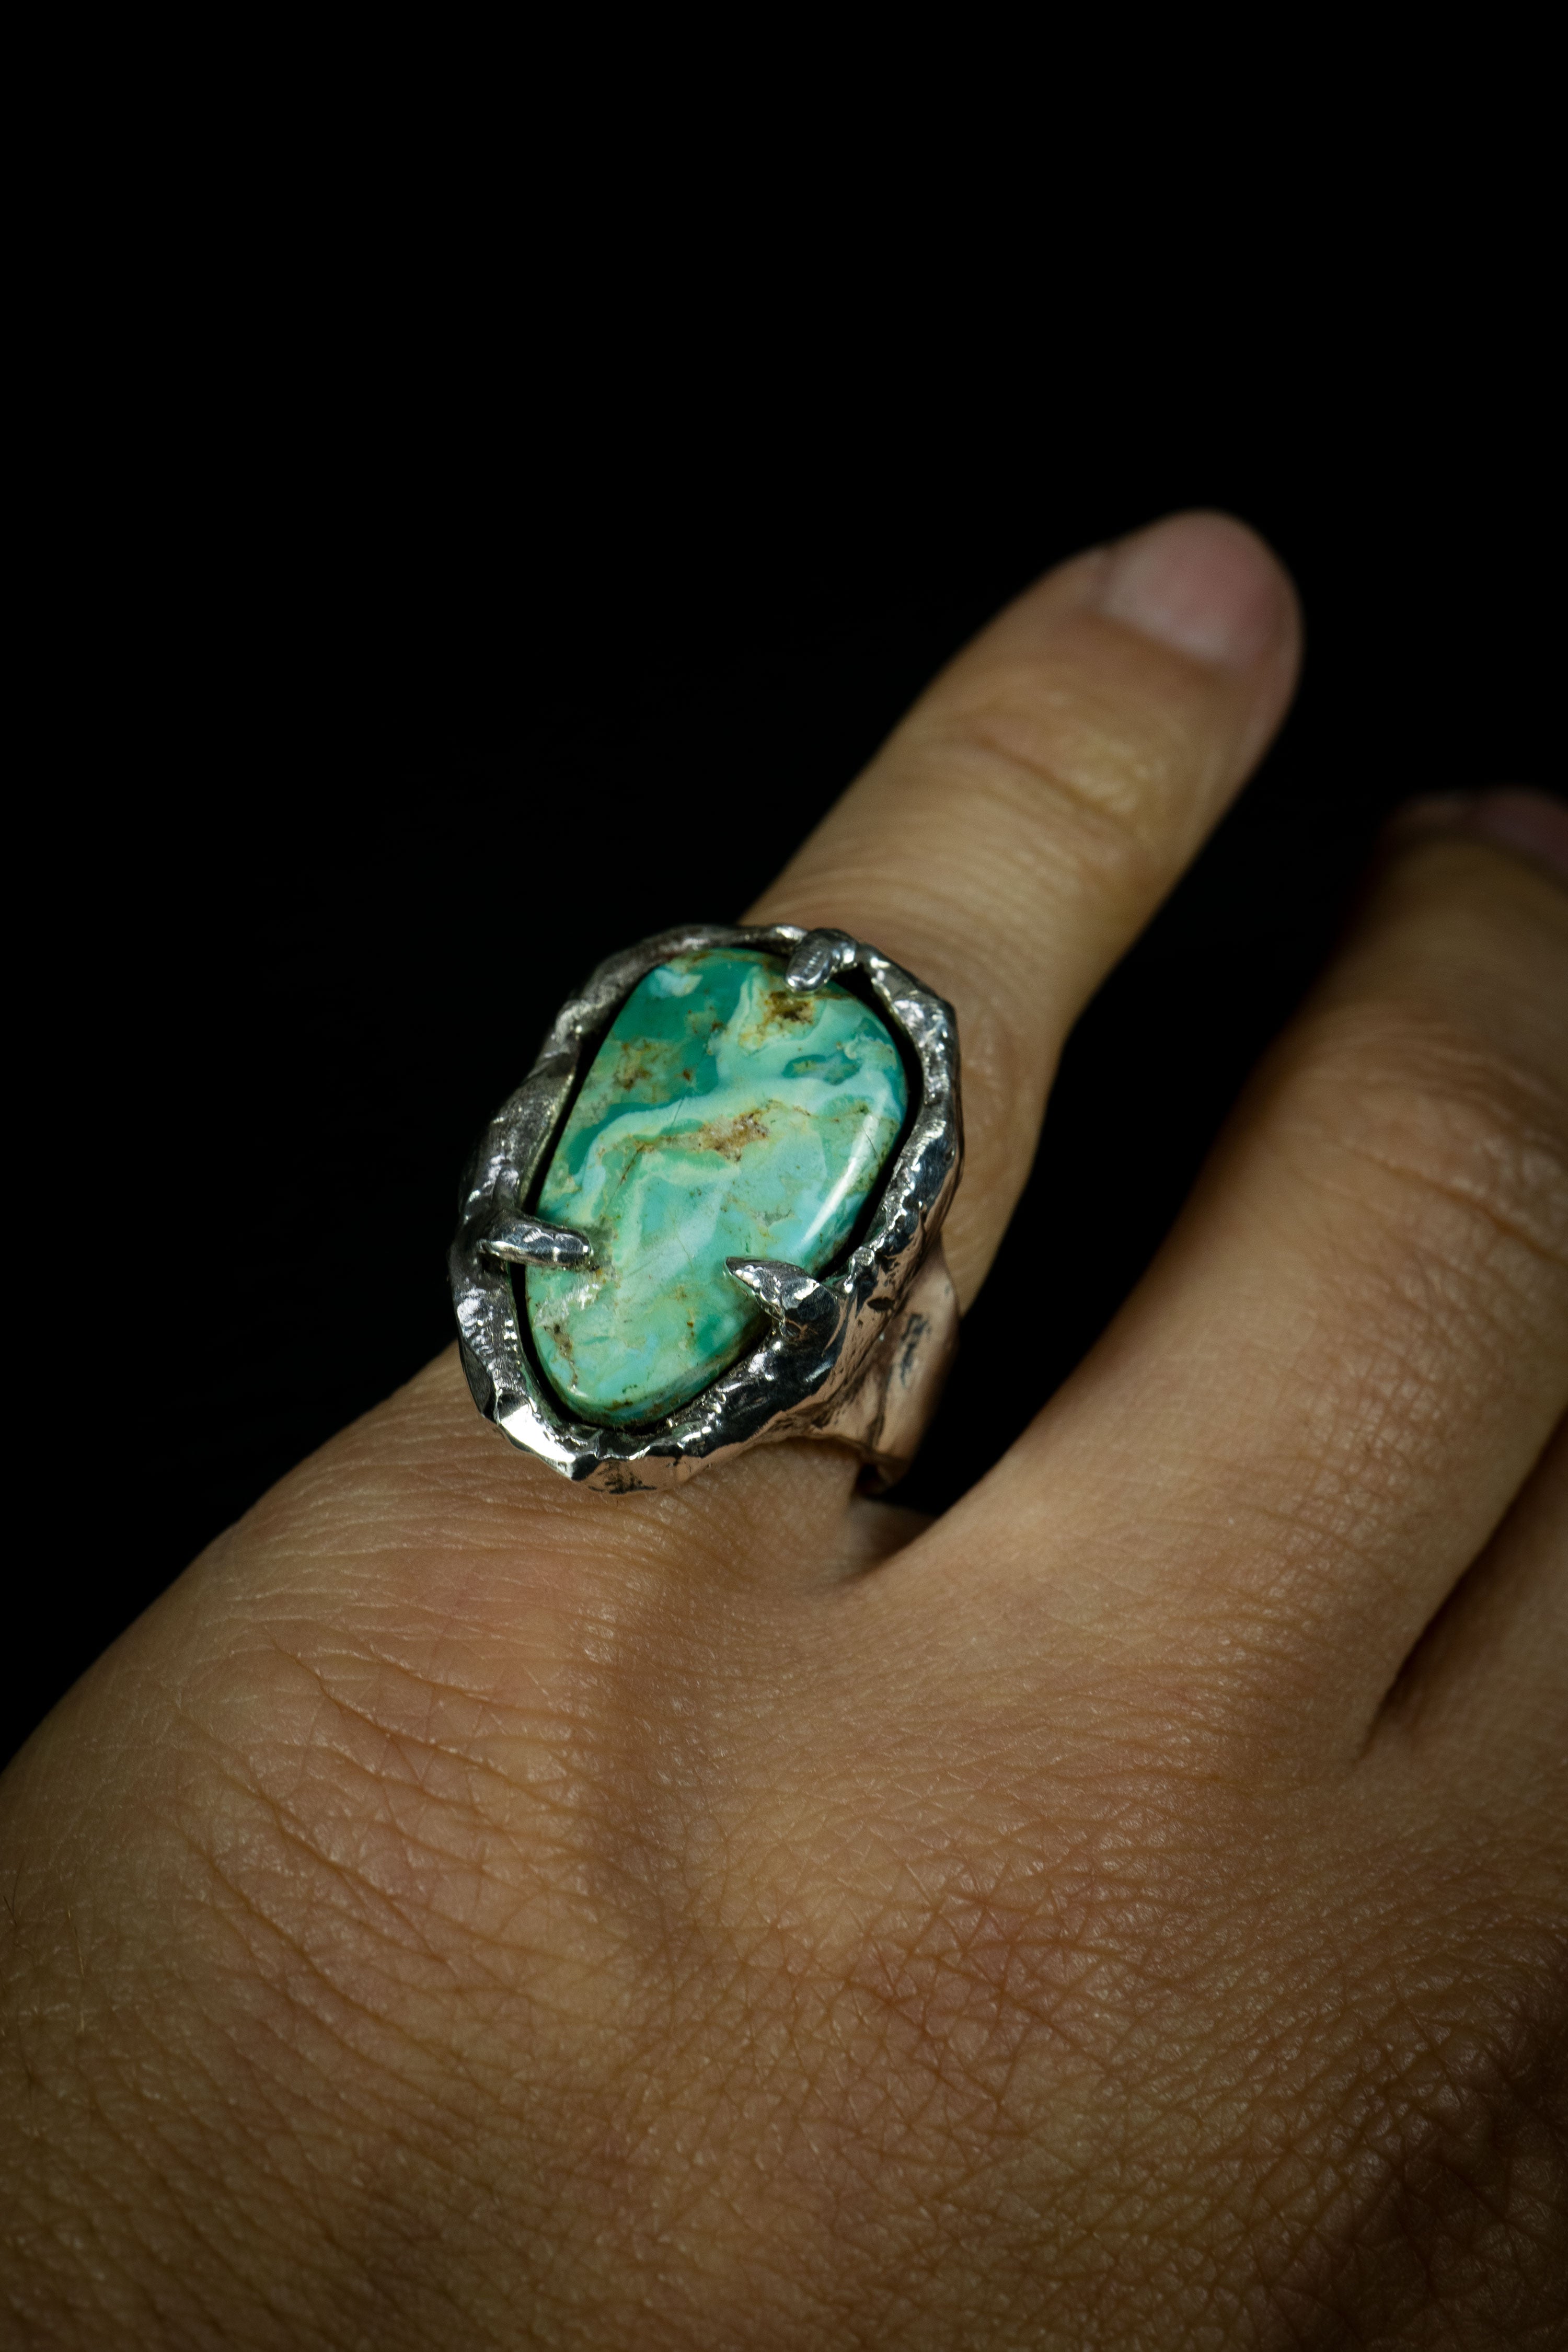 Traveling Dream (Baja Turquoise, Sterling Silver Ring)